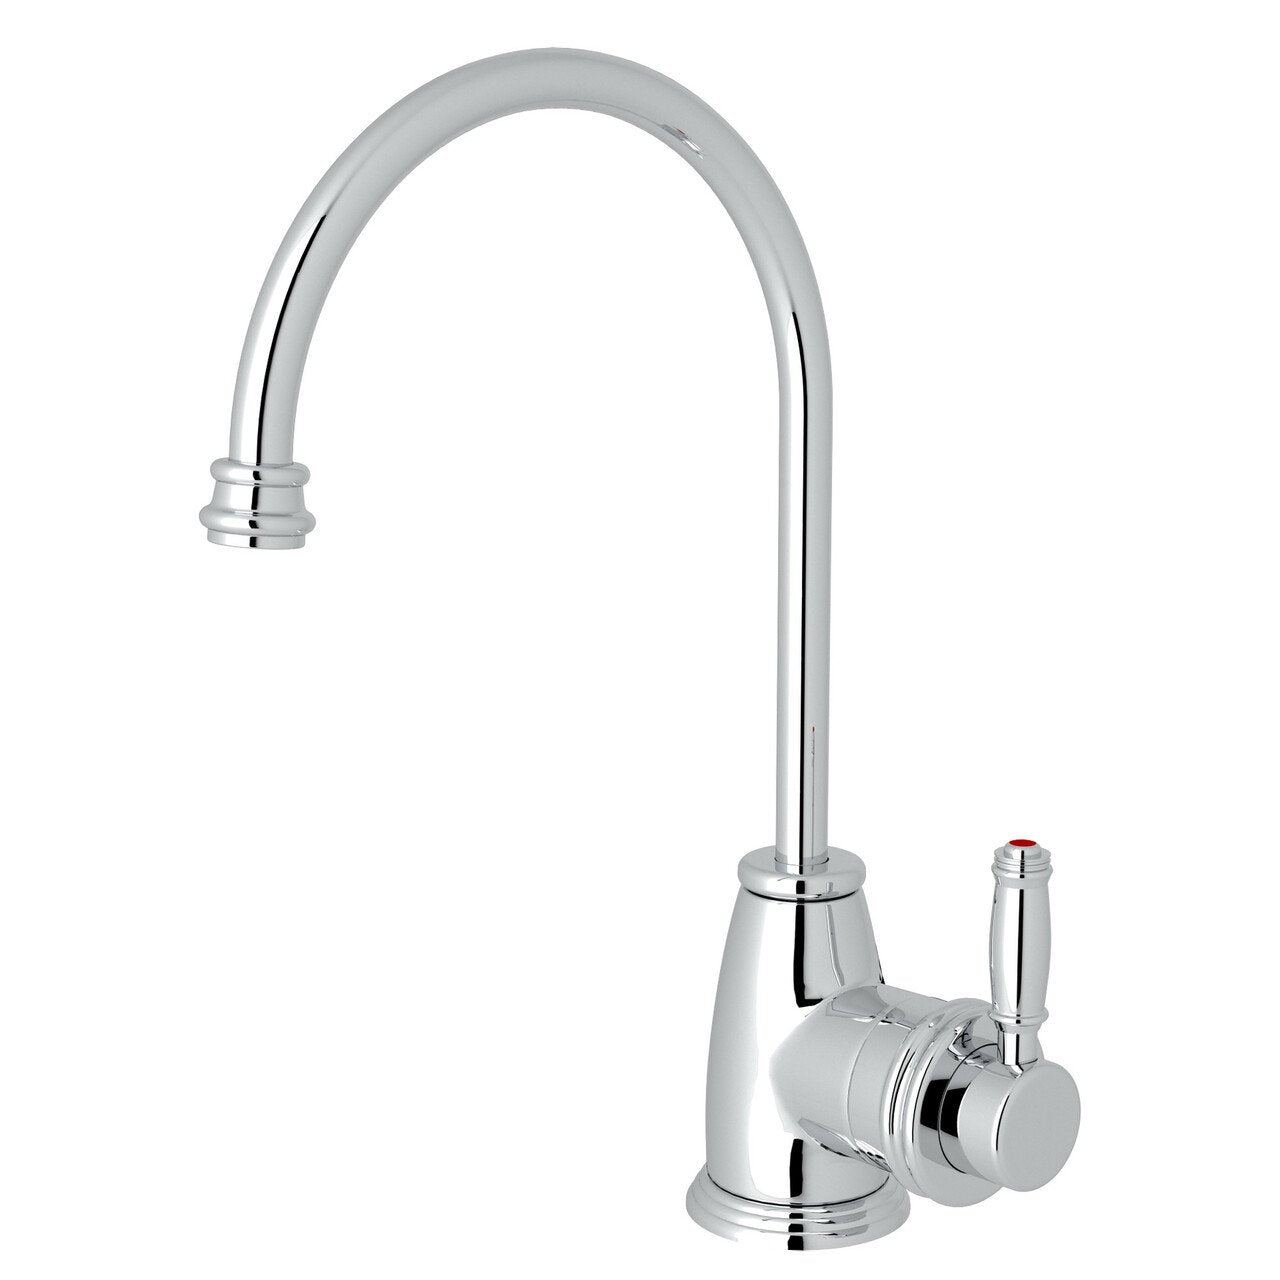 ROHL Gotham C-Spout Hot Water Faucet - BNGBath